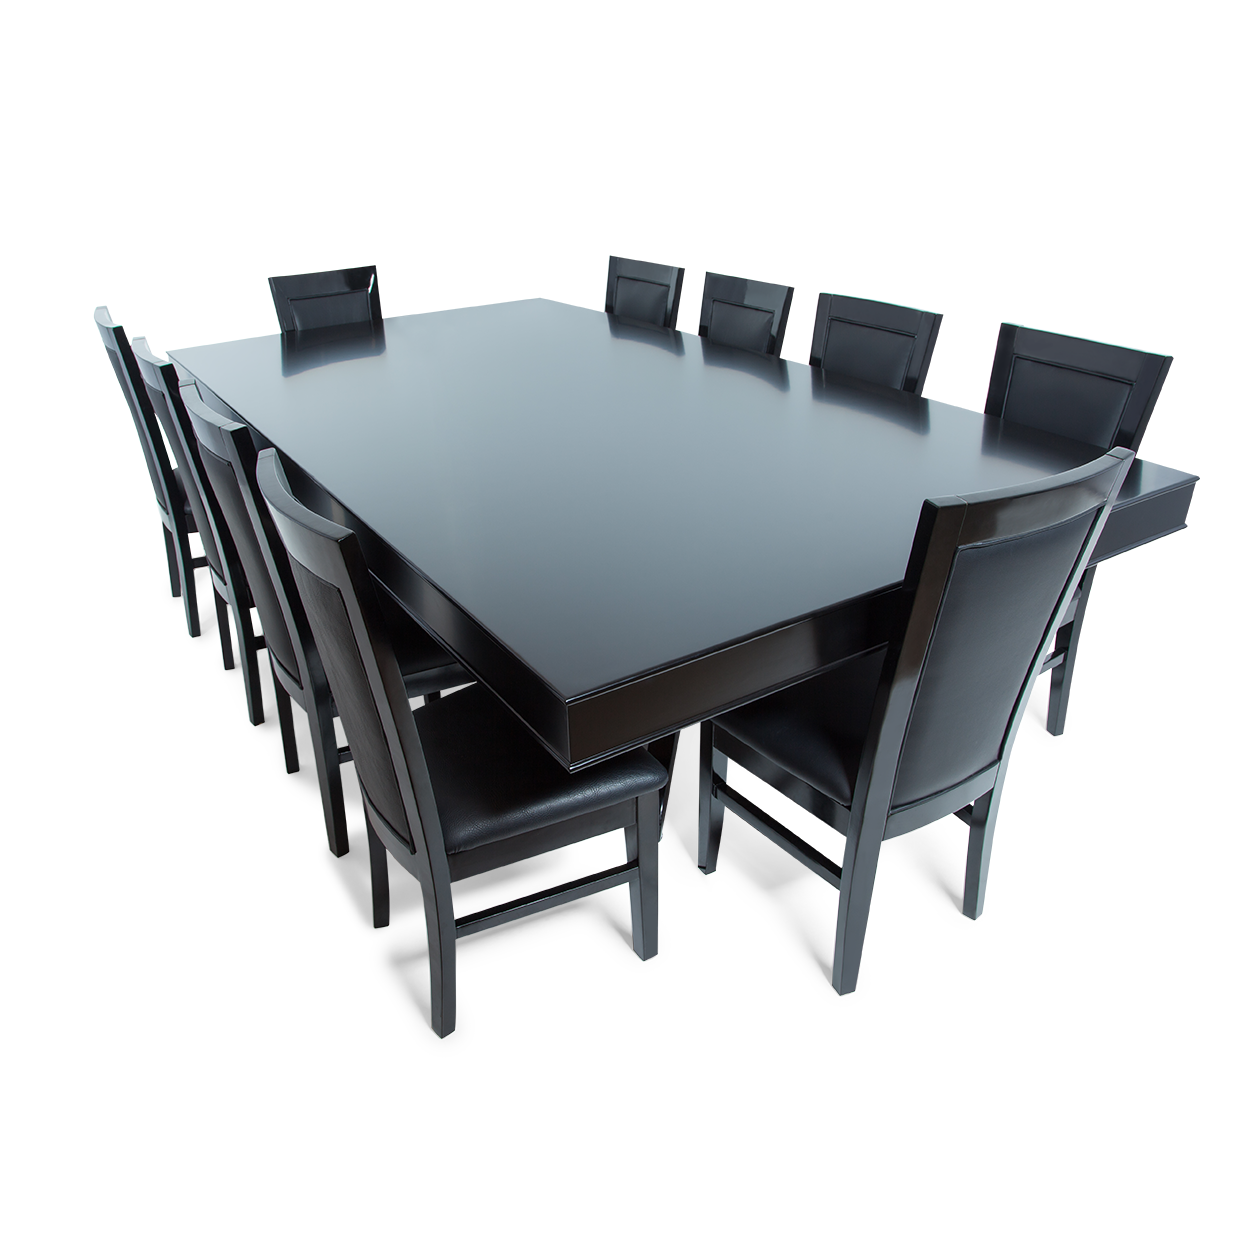 BBO Lumen HD Poker Table Dining With Classic BBO Chairs